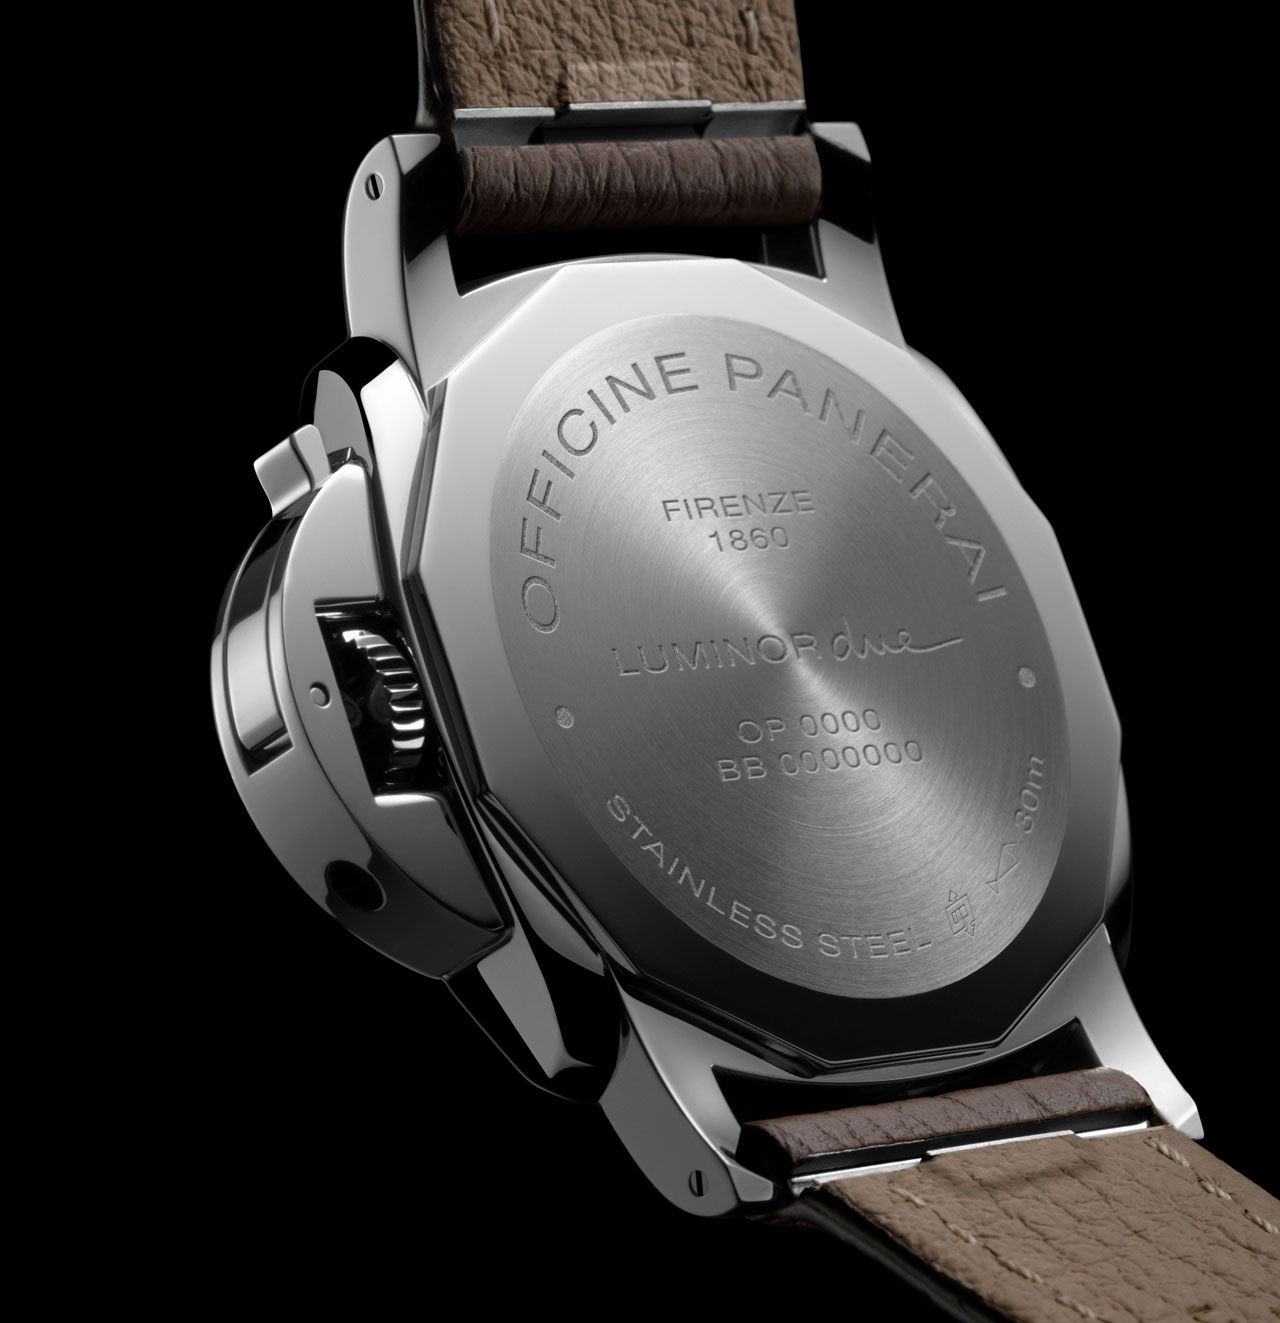 Panerai - Luminor Due, new 2019 models | Time and Watches | The watch blog